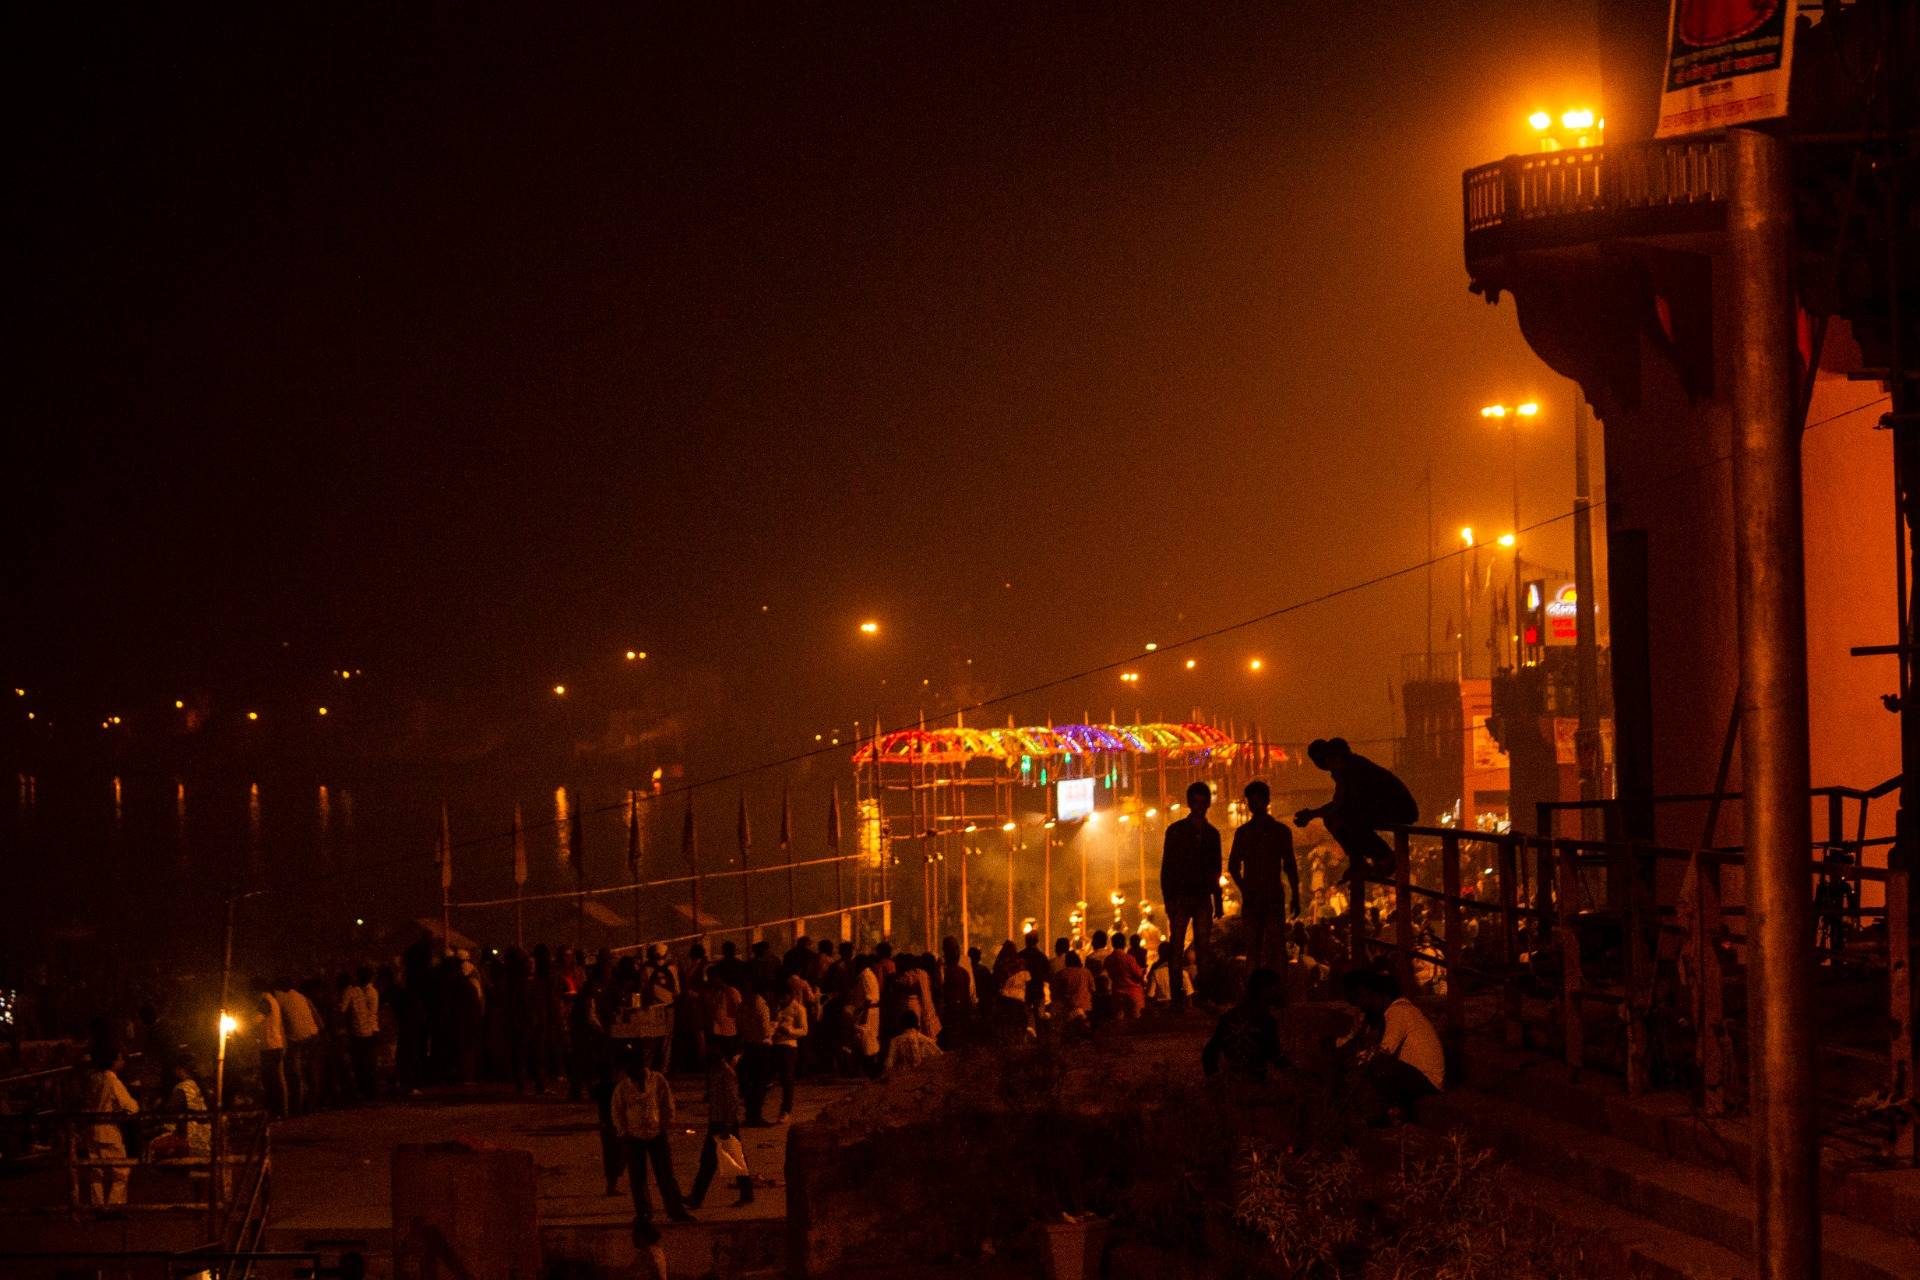 Crowds of youths hang out by the River Ganges smoking dope.